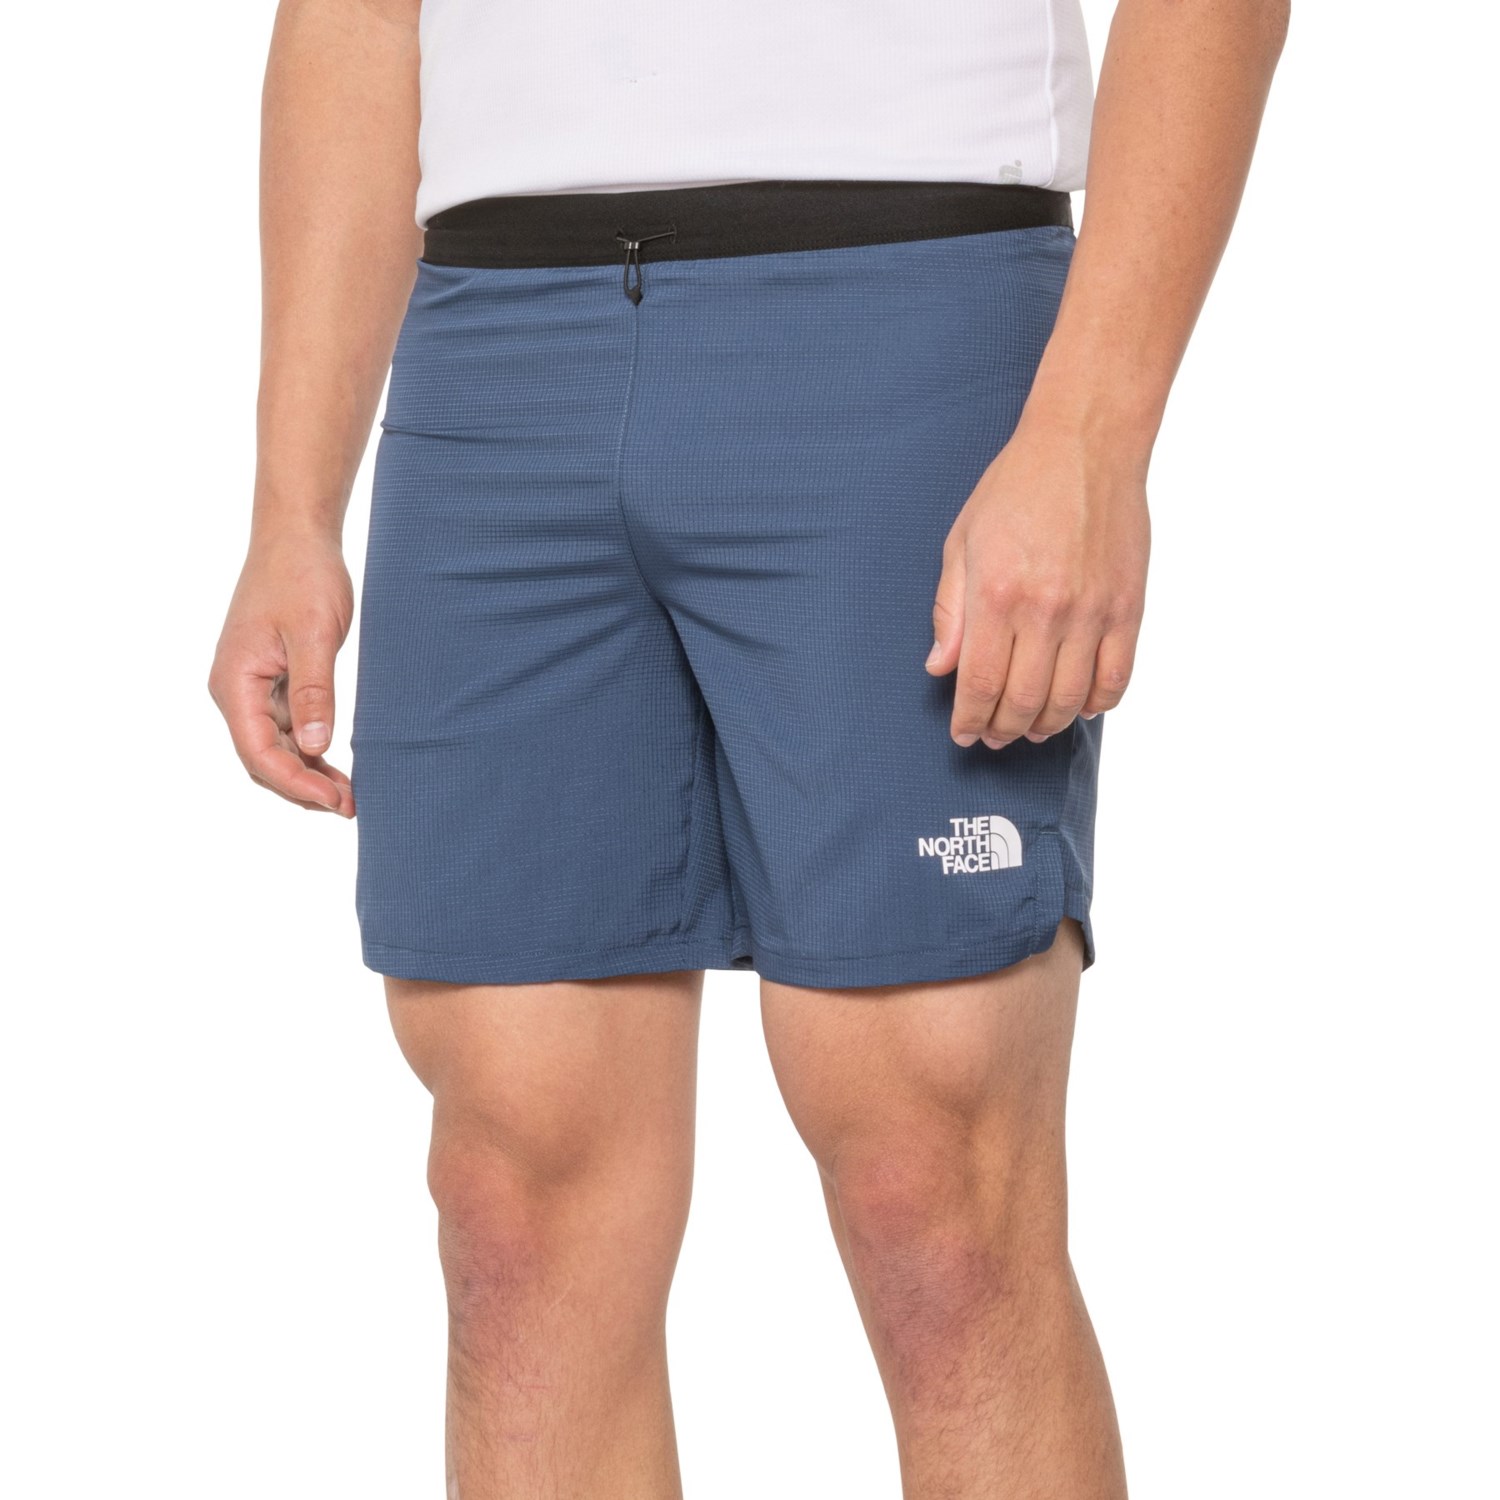 The North Face Sunriser Shorts - Built-in Brief